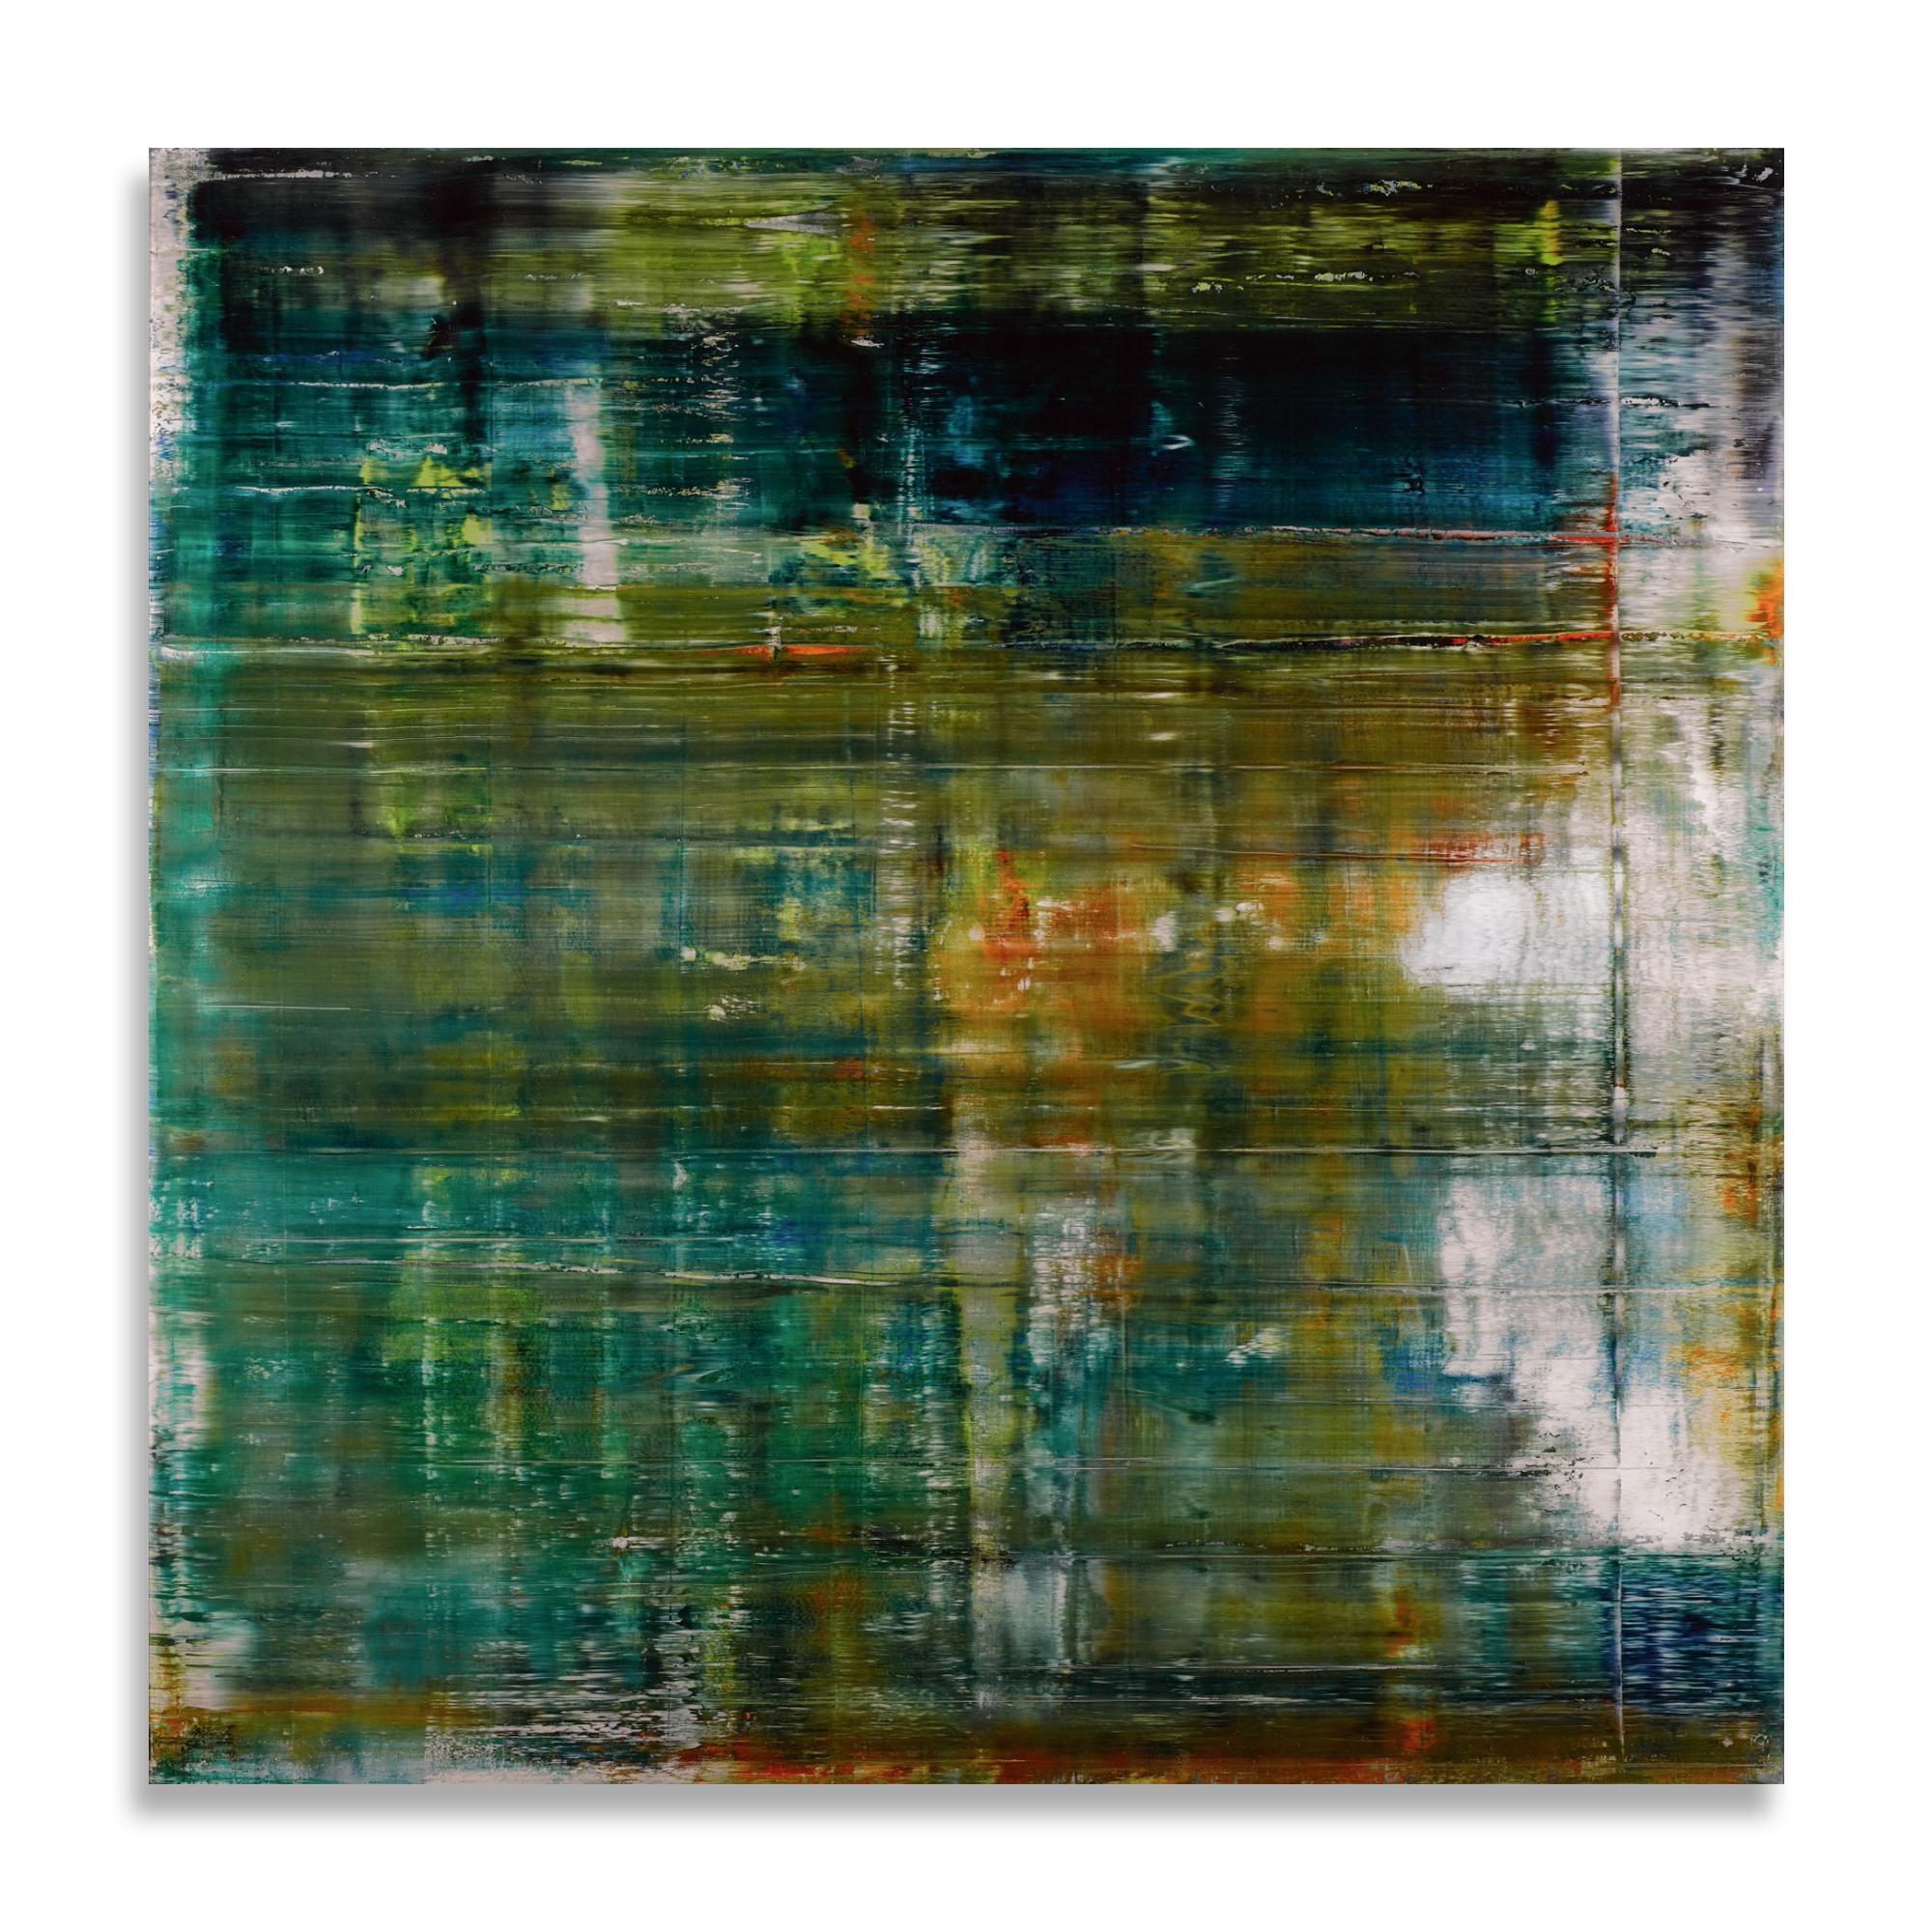 This is an official giclée print of Gerhard Richters painting Cage 1 from 2006 (CR 897-1), 2900 x 2900 mm (oil on canvas).

Gerhard Richter (German, b. 1932)
Cage (P19-1), 2020
Medium: Diasec-mounted Giclée print on aluminium composite